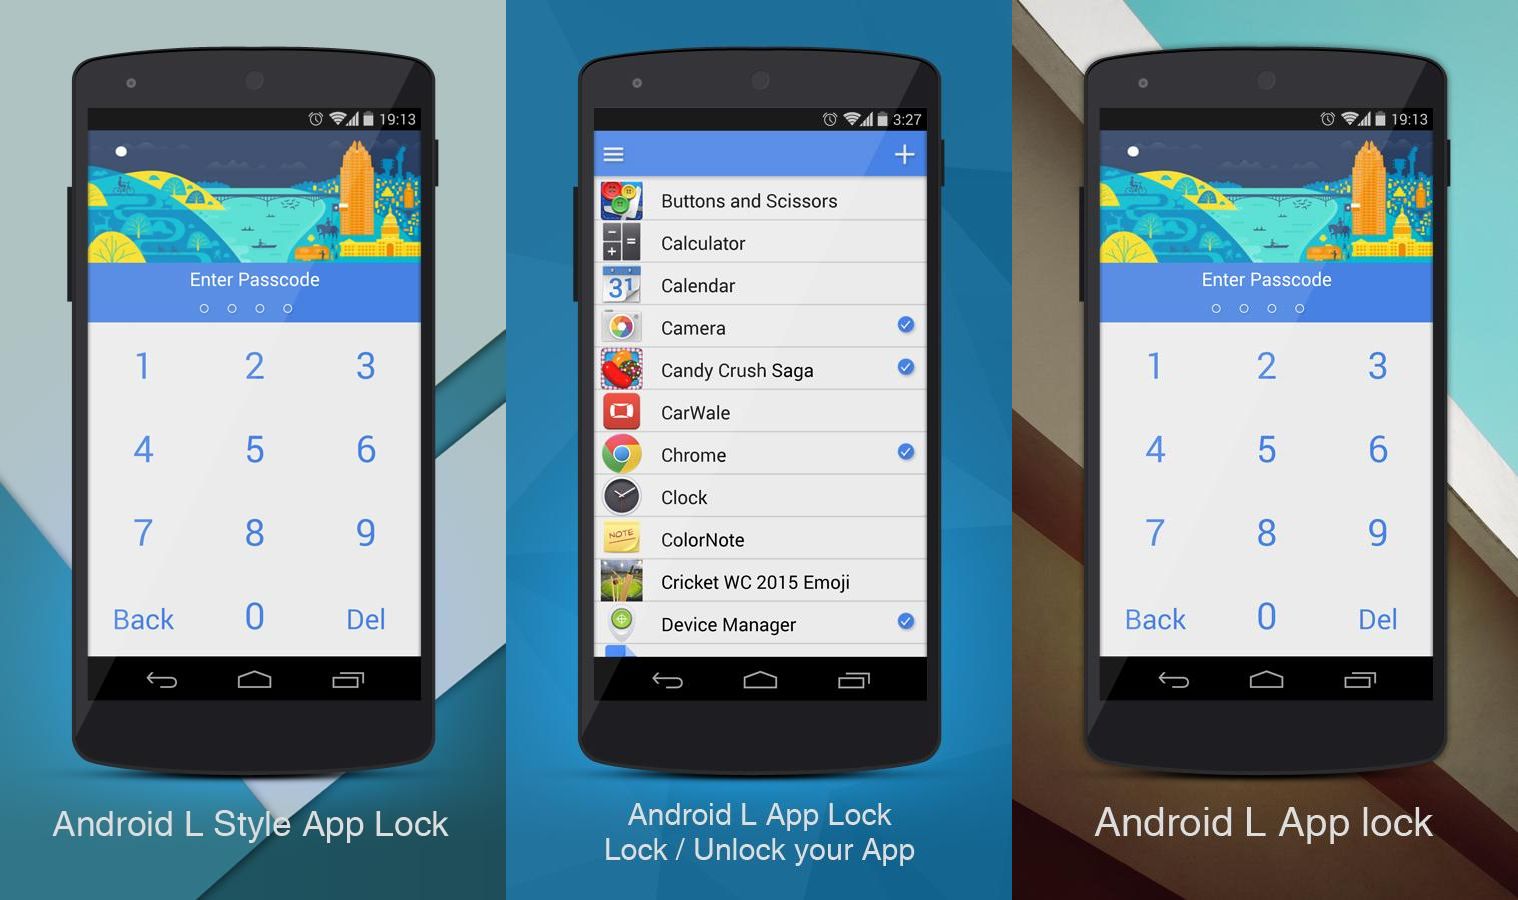 Best Android Apps for the week of 10th August, 2014